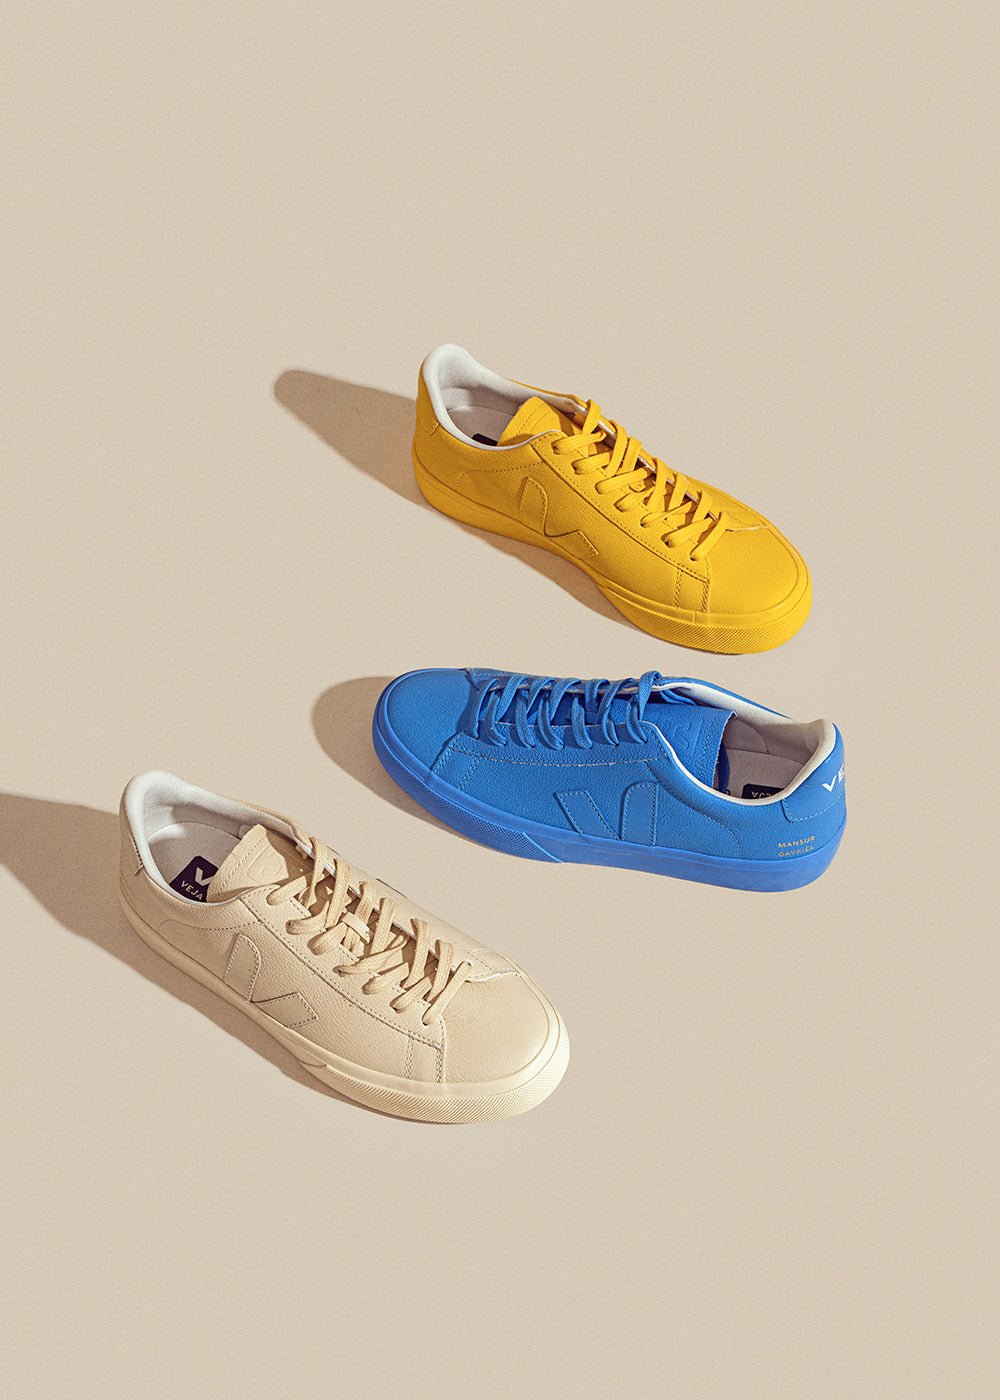 Veja Celeste Blue Campo Sneaker - New Classics Studios Sustainable Ethical Fashion Canada